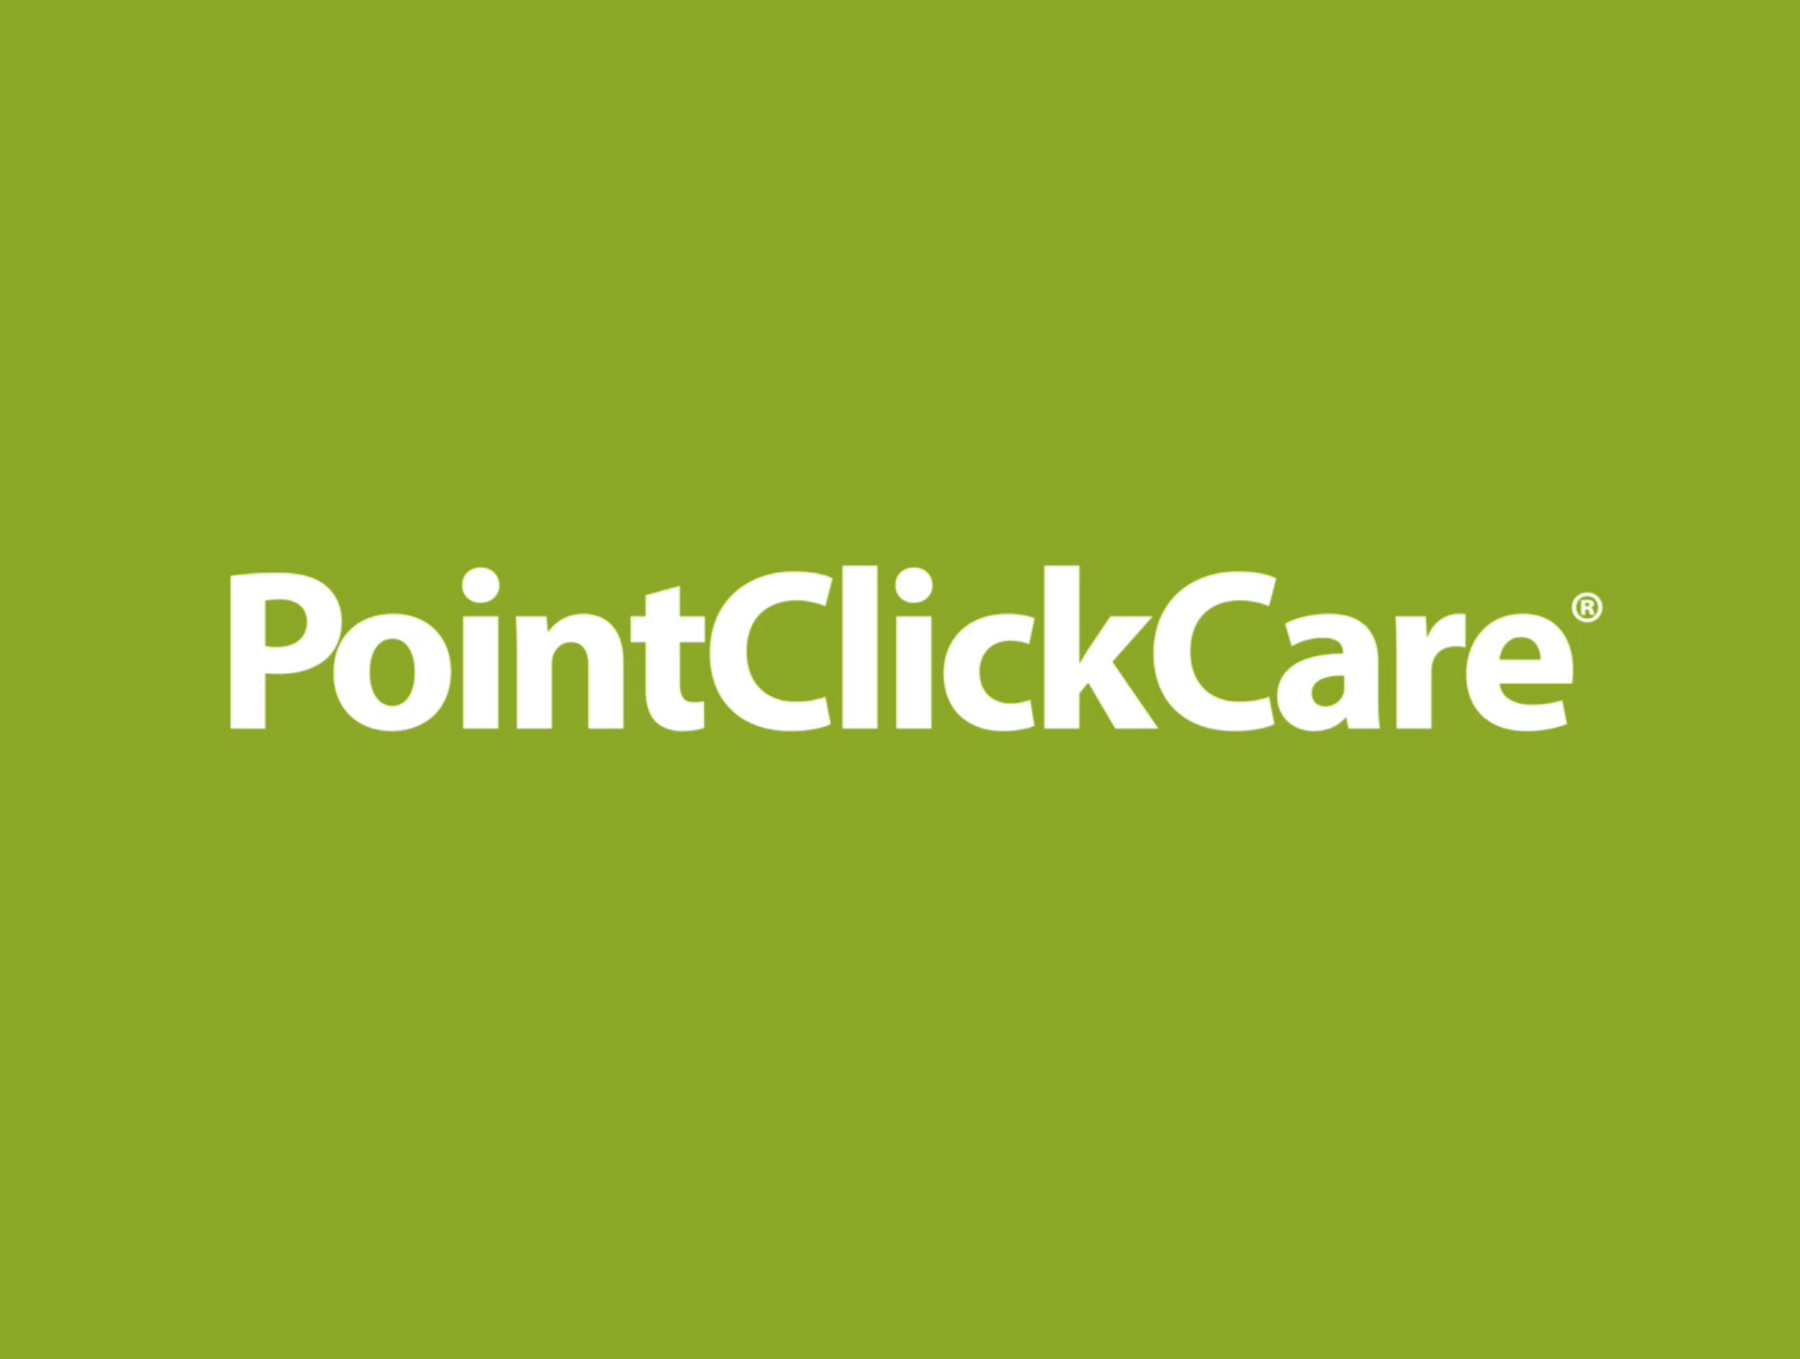 Cloud-Based Healthcare Software Provider - PointClickCare